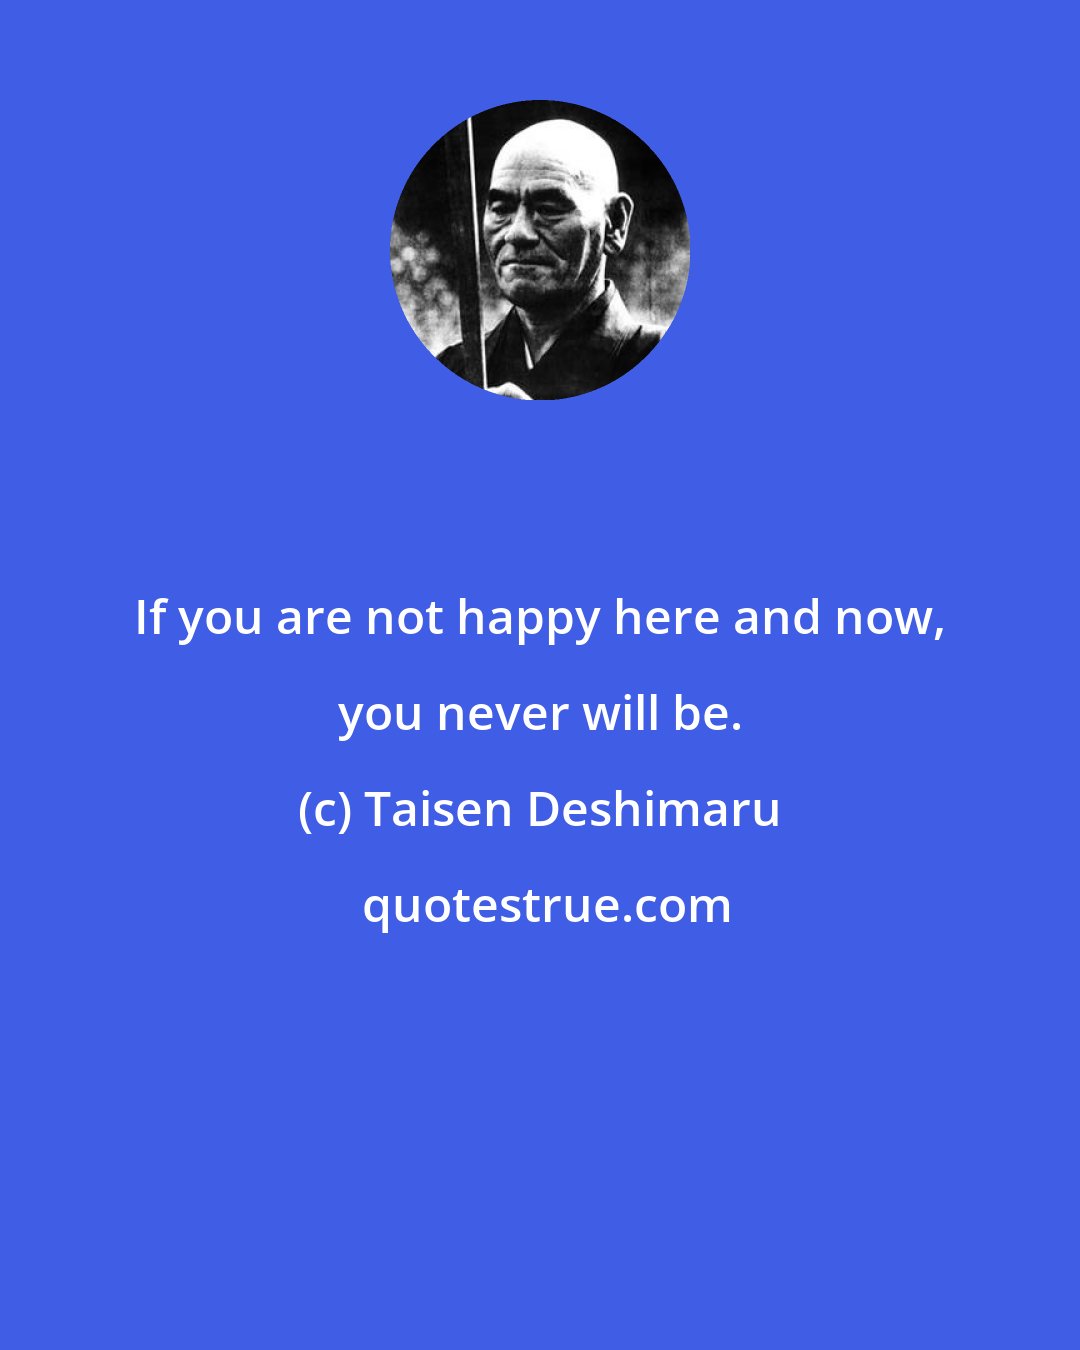 Taisen Deshimaru: If you are not happy here and now, you never will be.